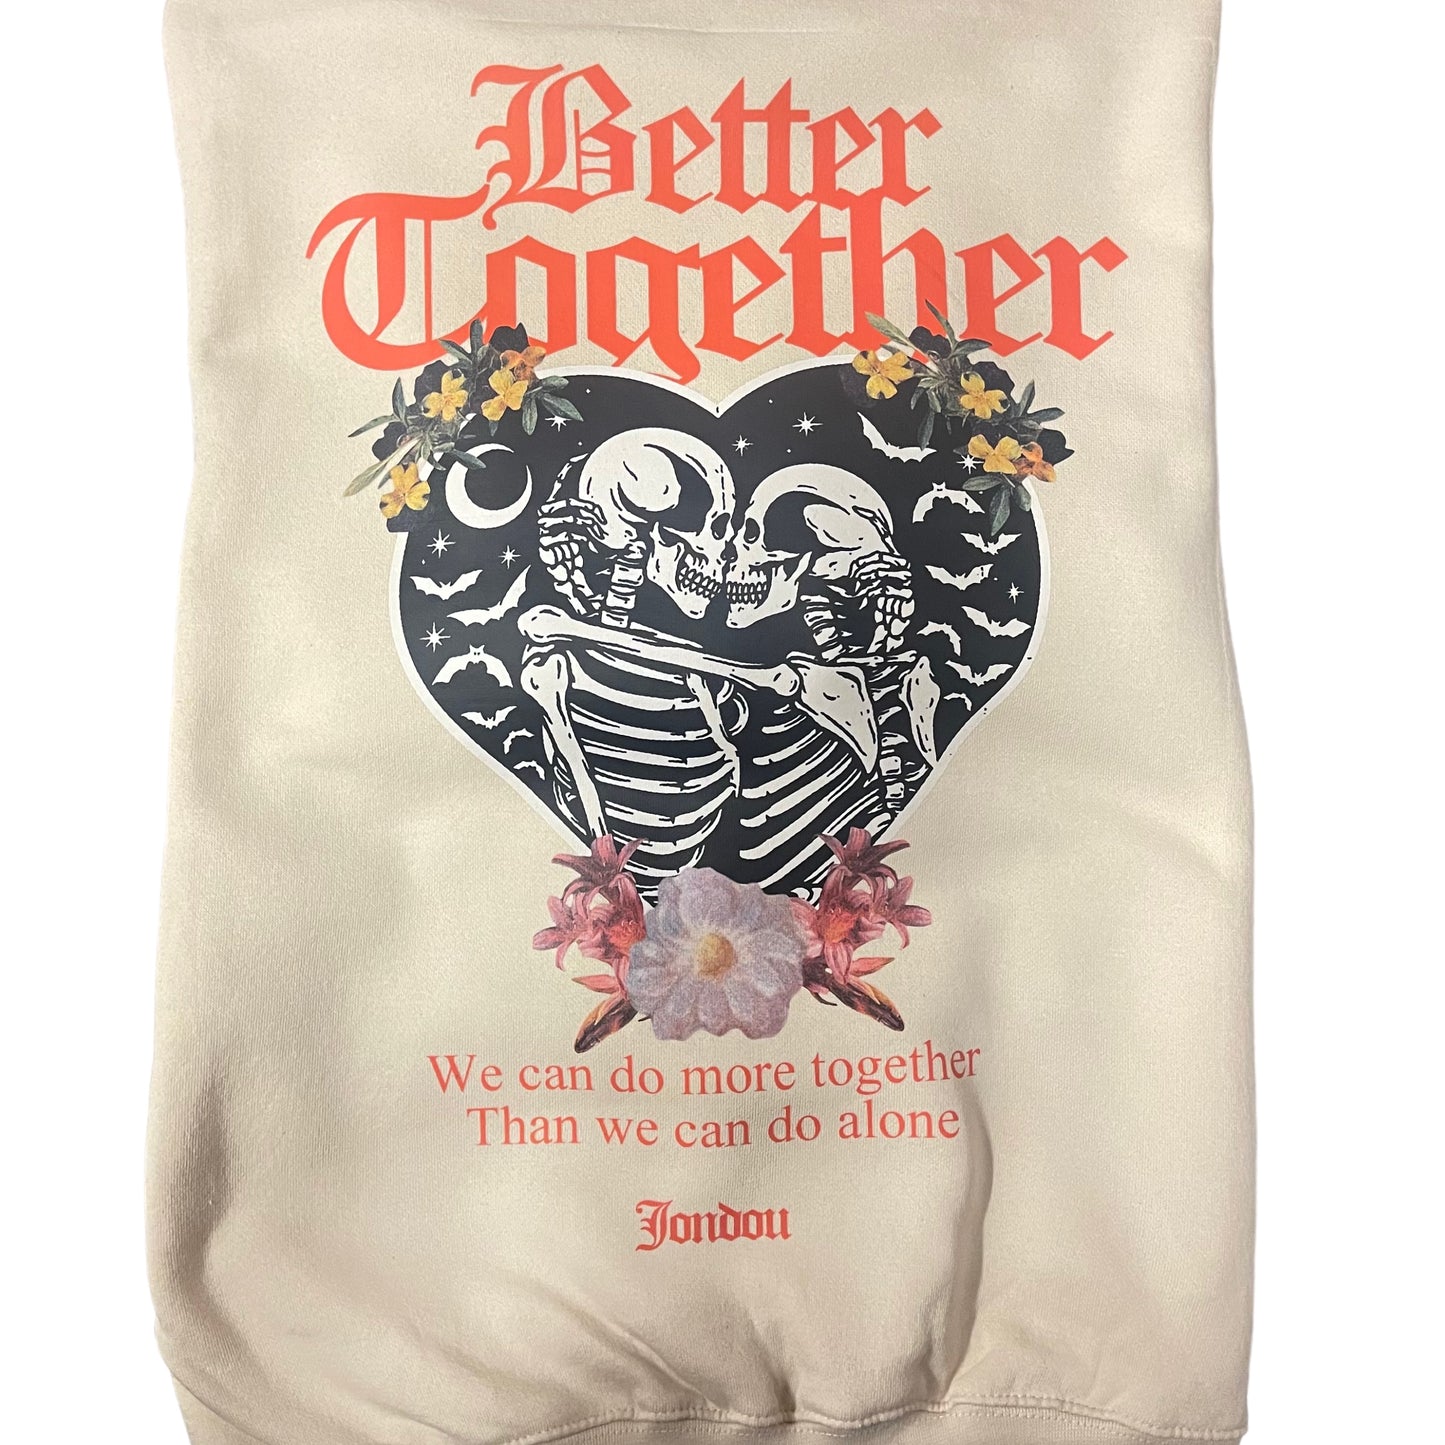 Better together sweatsuit